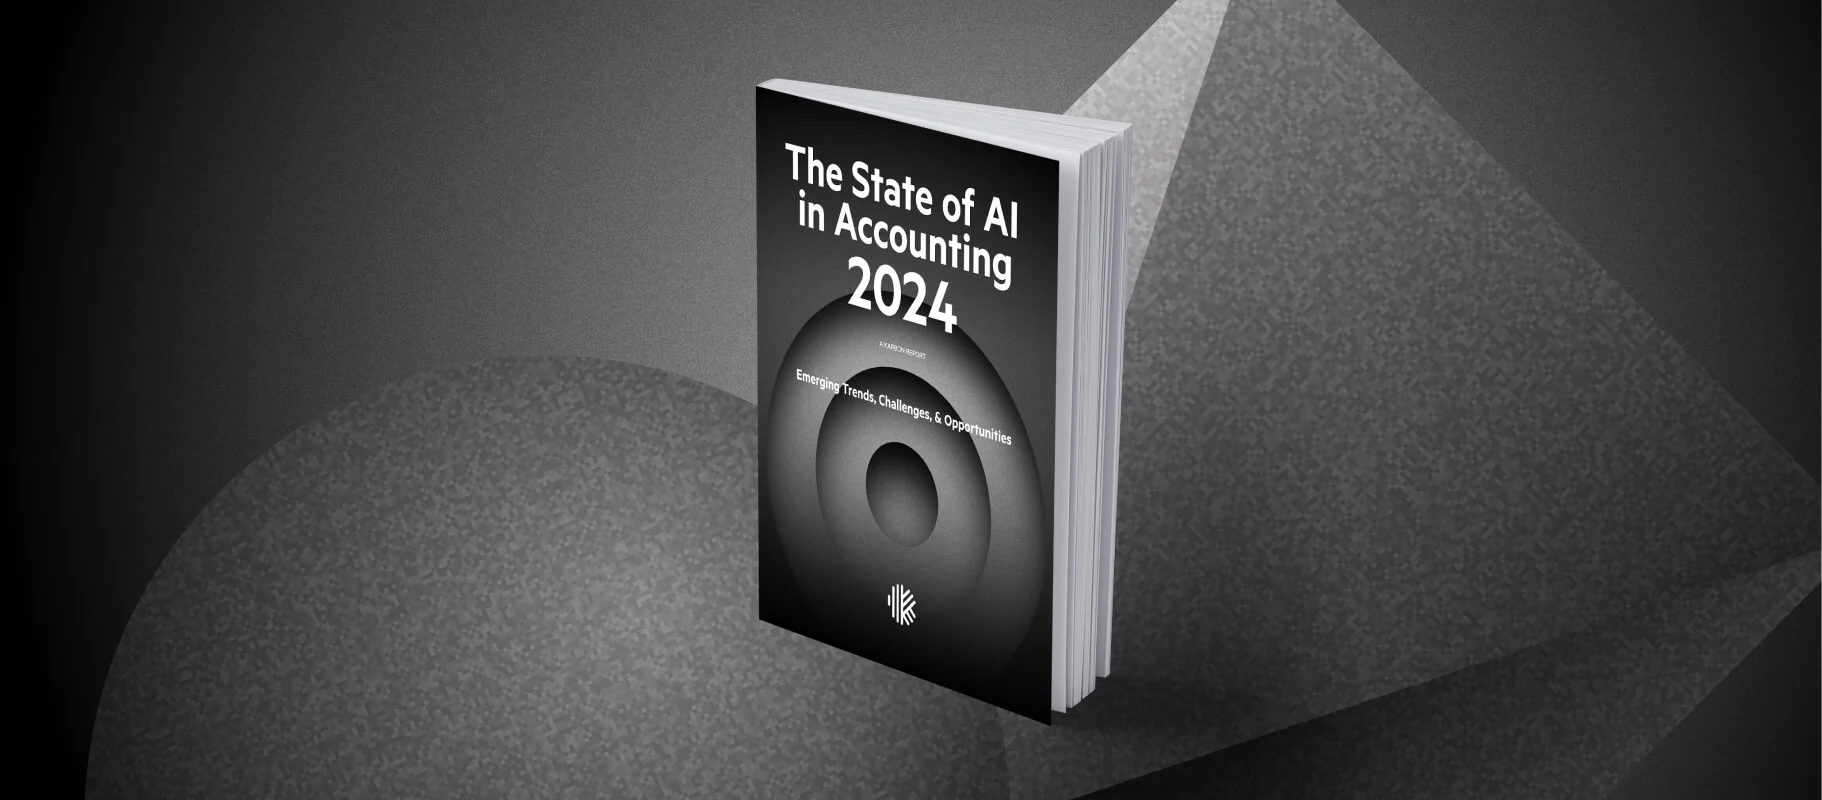 The State of AI in Accounting Report 2024 by Karbon logo